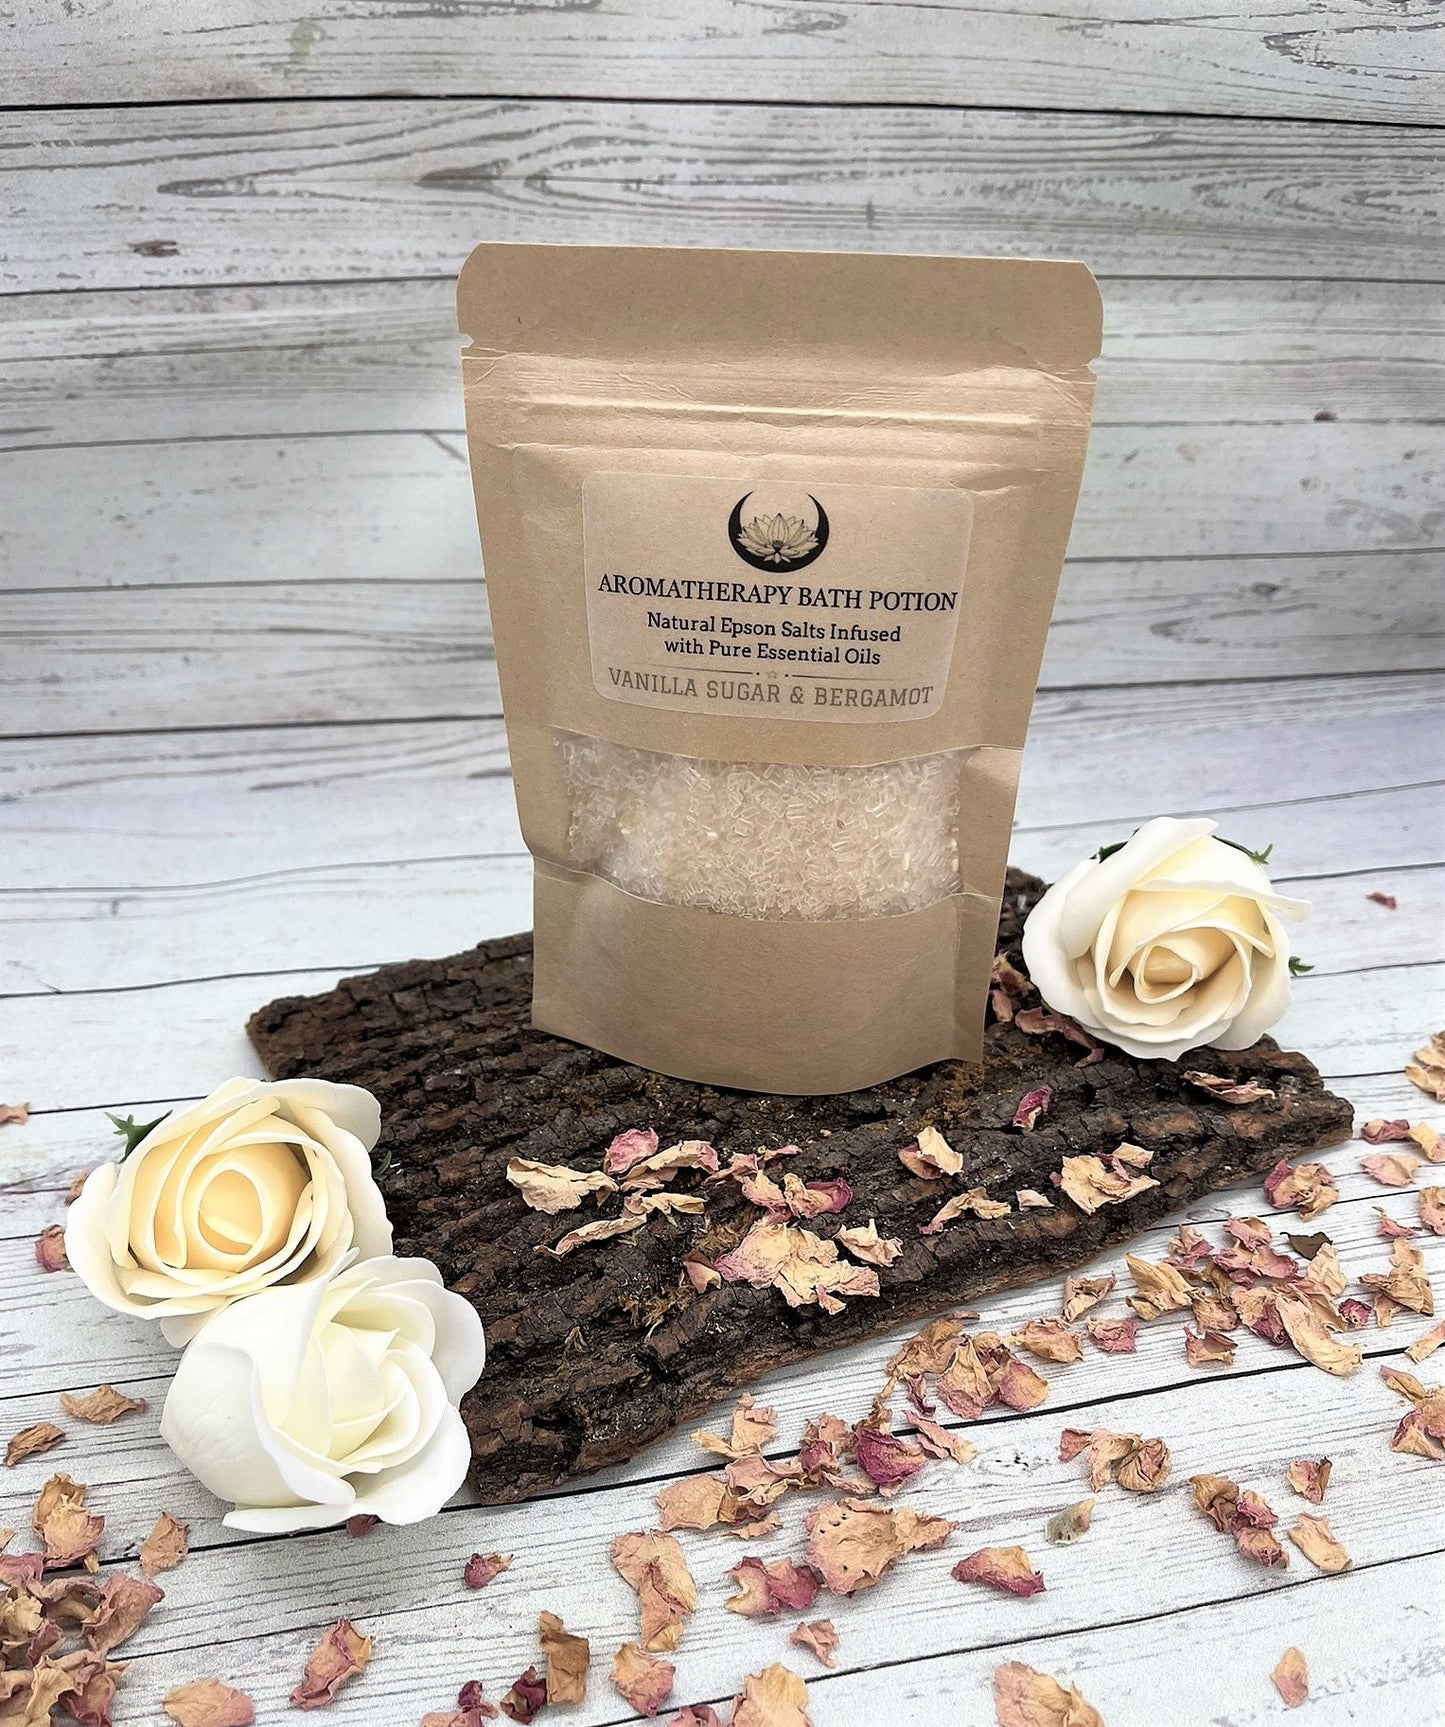 THE BLOOMING CREAM Luxury Spa Gift Box, Quartz Vanilla Candle, Aromatherapy Bath Salts, Soap Flowers, Bathe in Beauty, Relaxation, Languish.